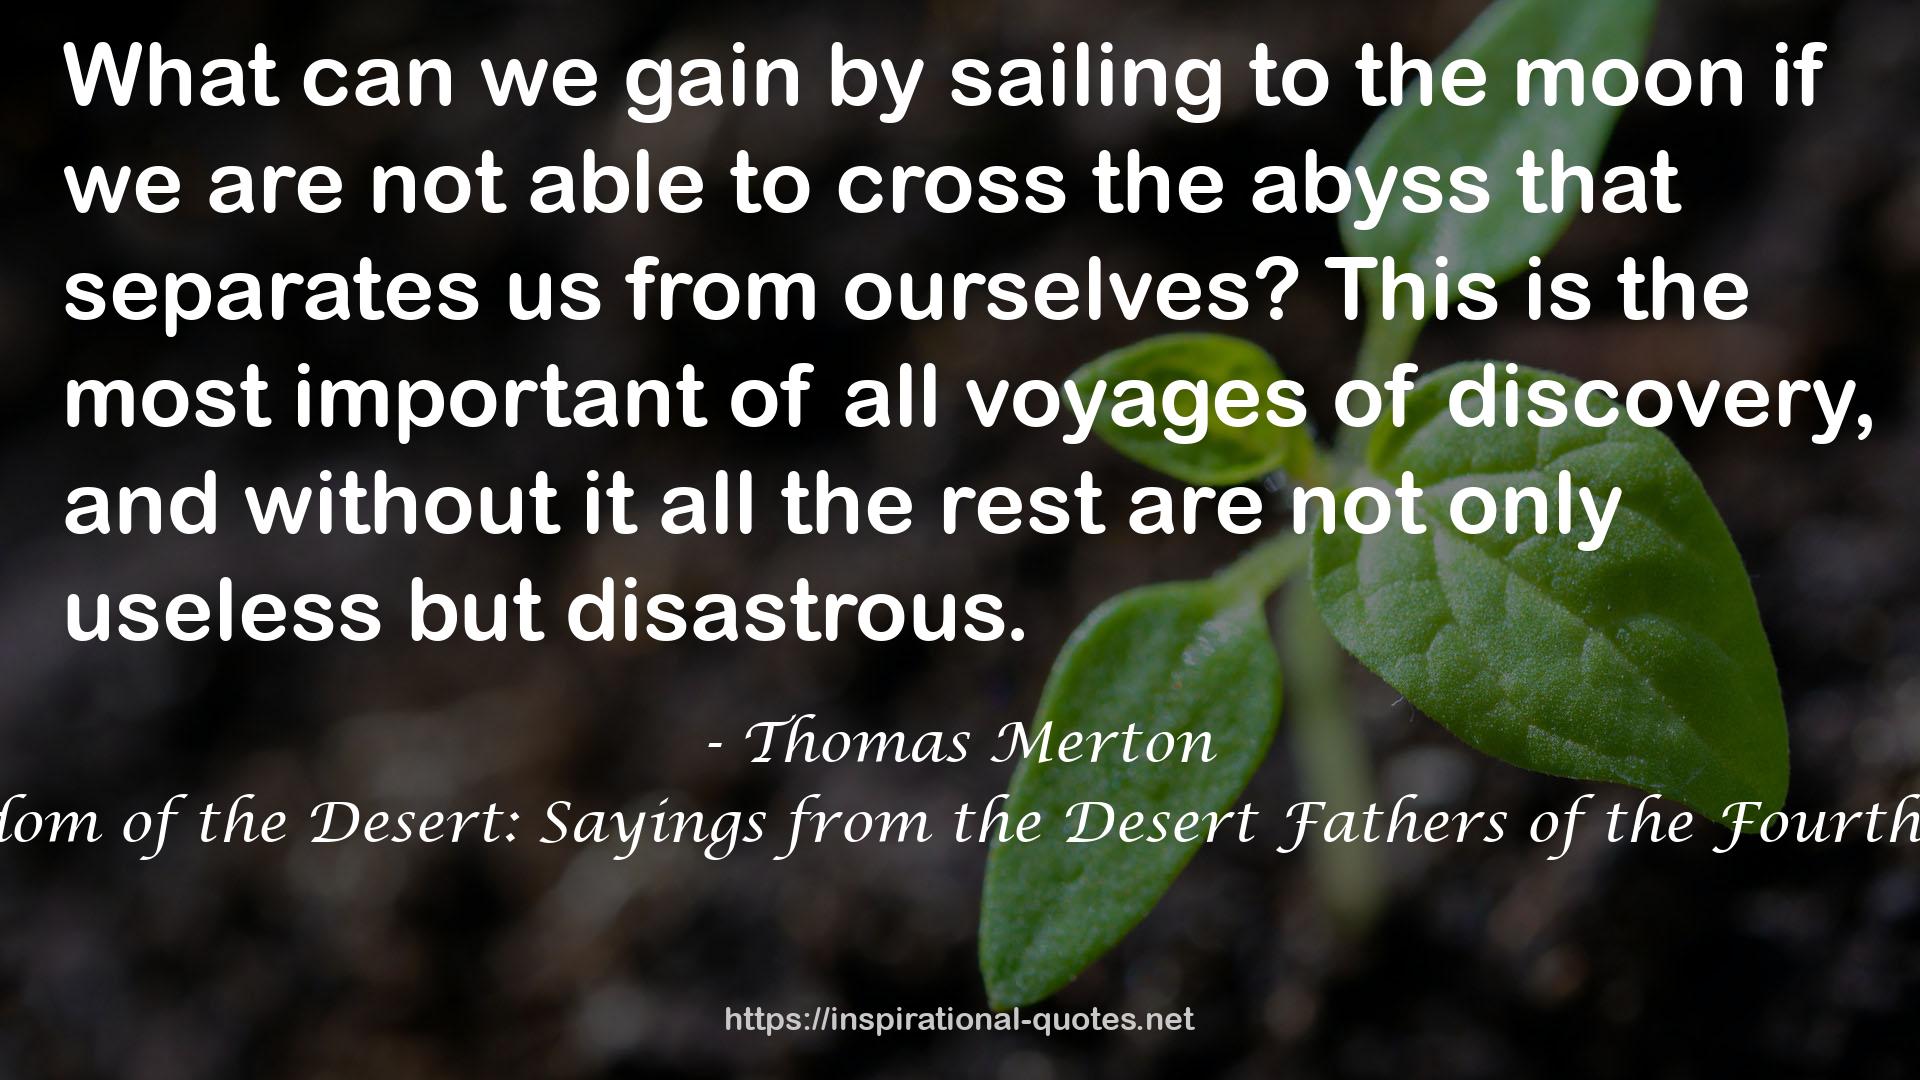 The Wisdom of the Desert: Sayings from the Desert Fathers of the Fourth Century QUOTES